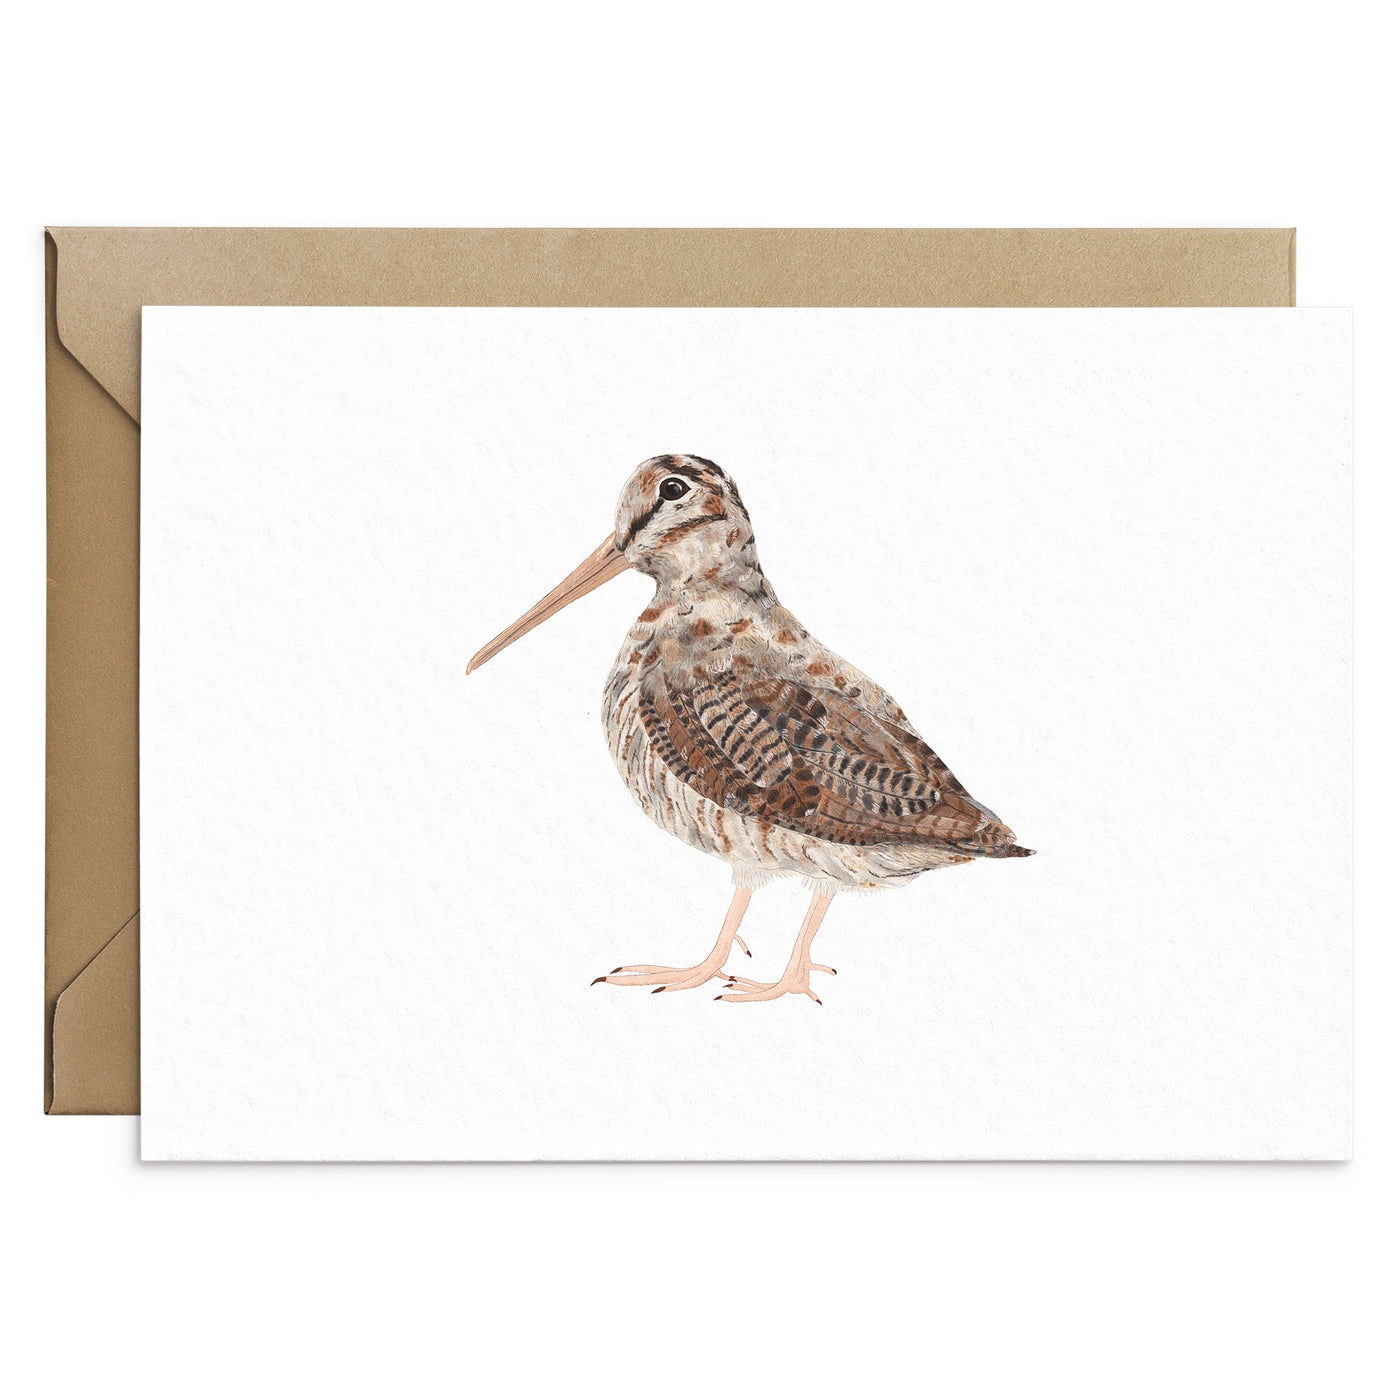 Woodcock Card - Poppins & Co.